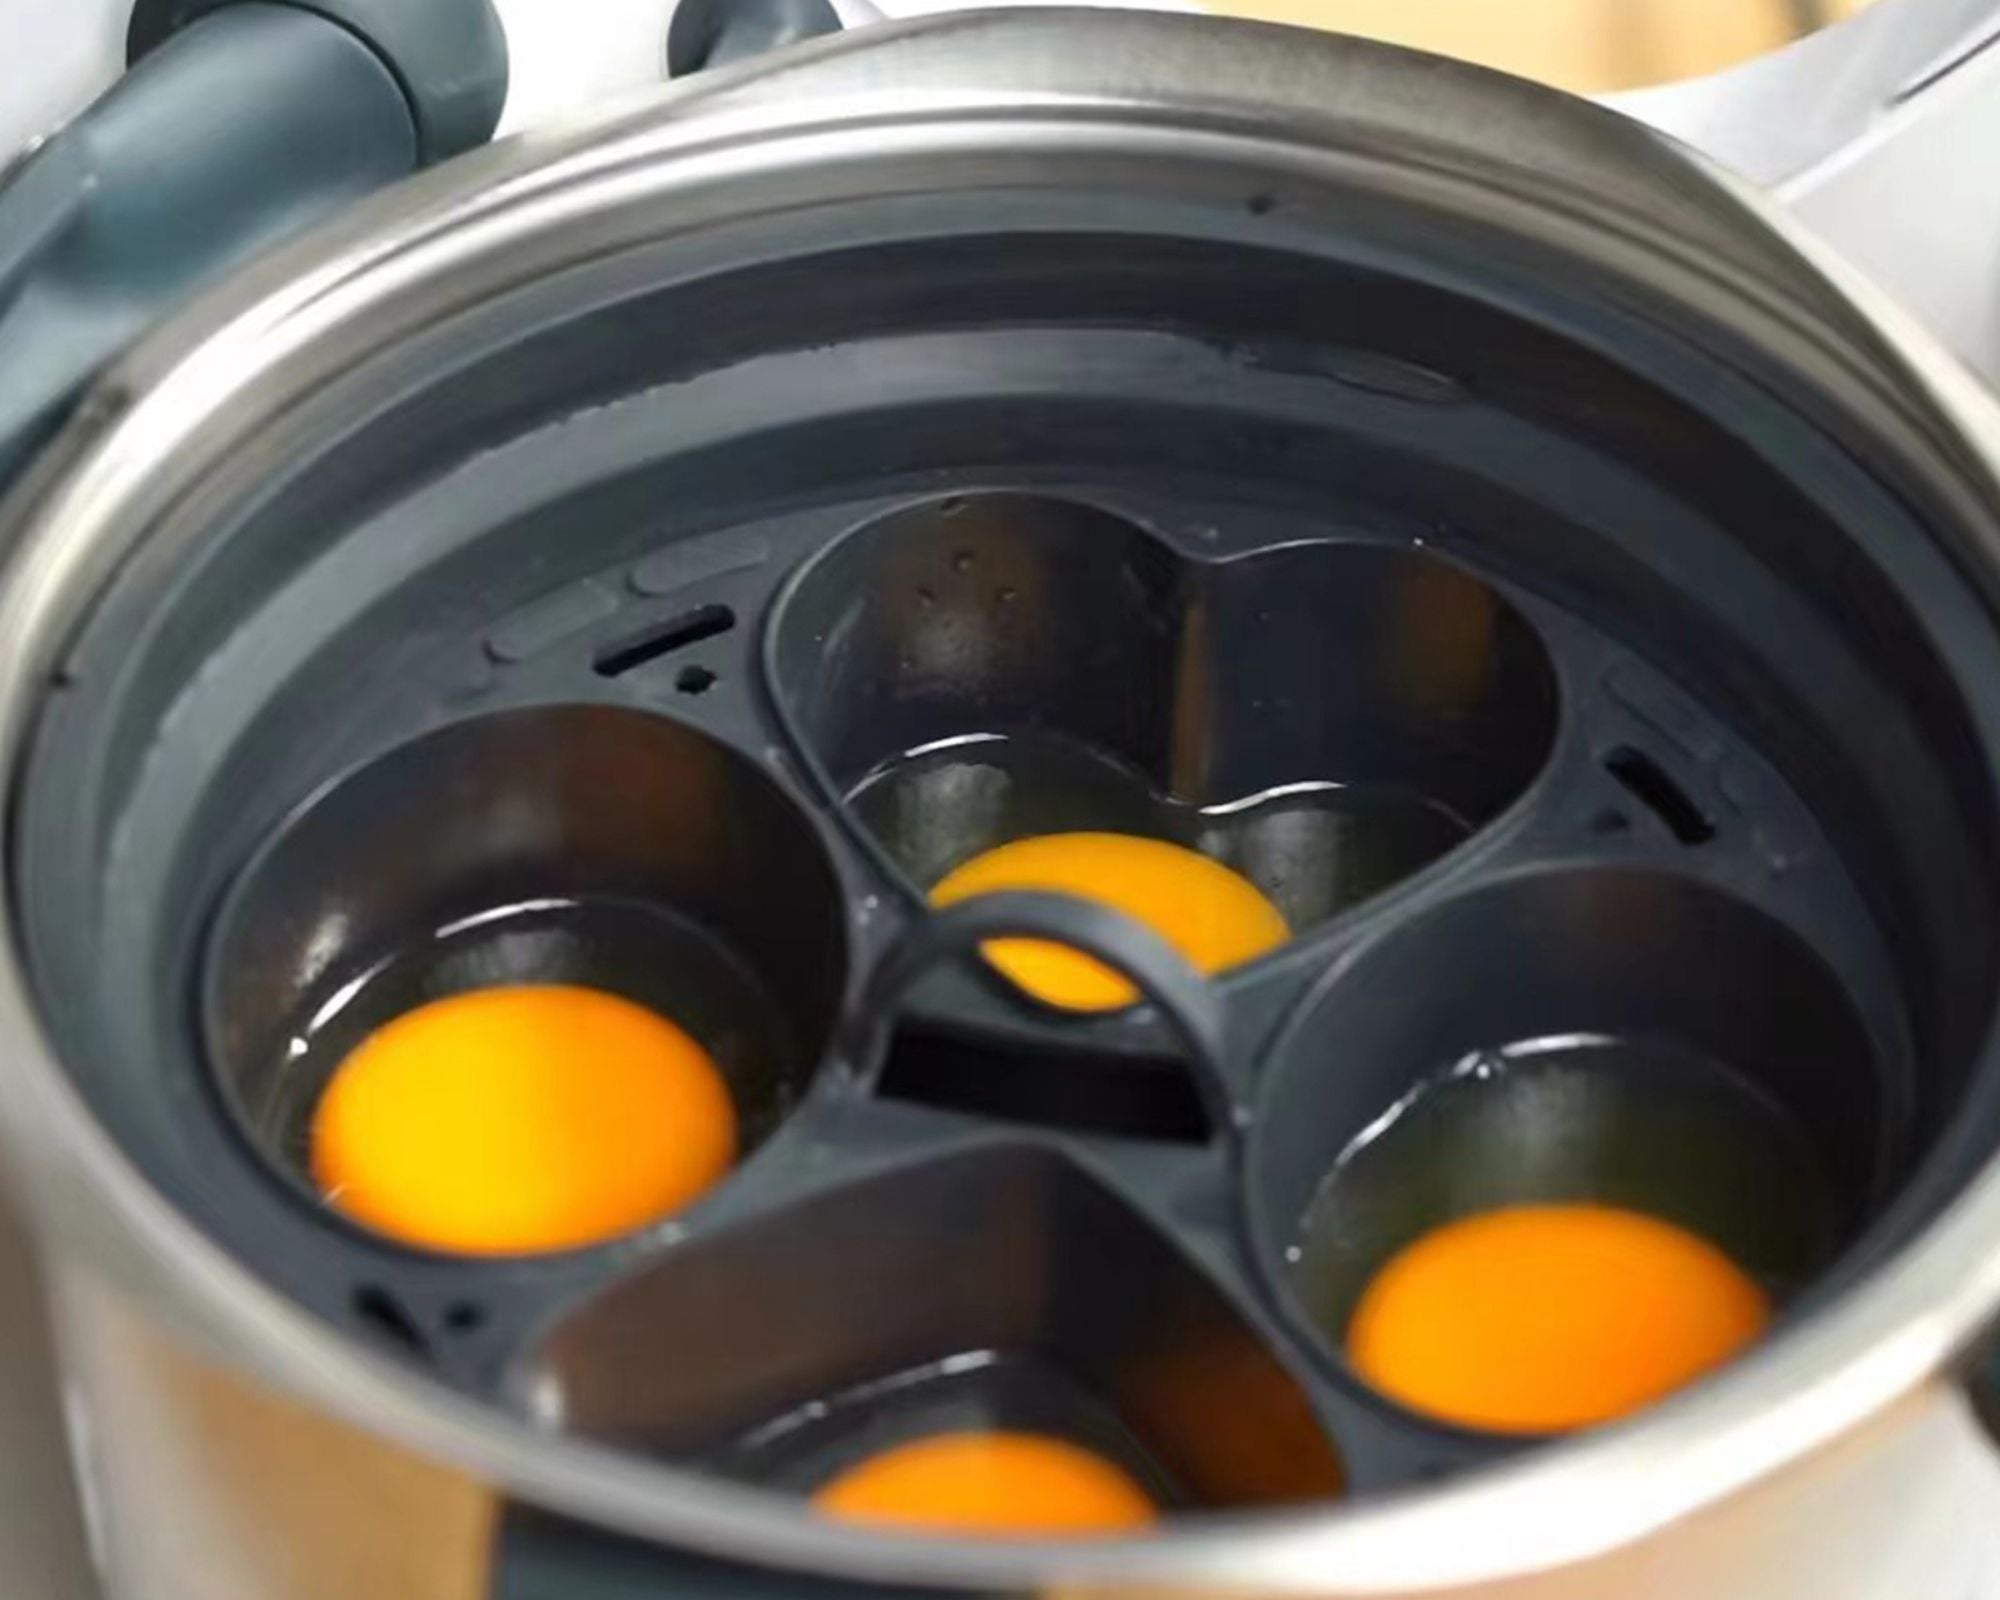 Cuisix - Egg Cooker for Thermomix (+ 1 FREE)